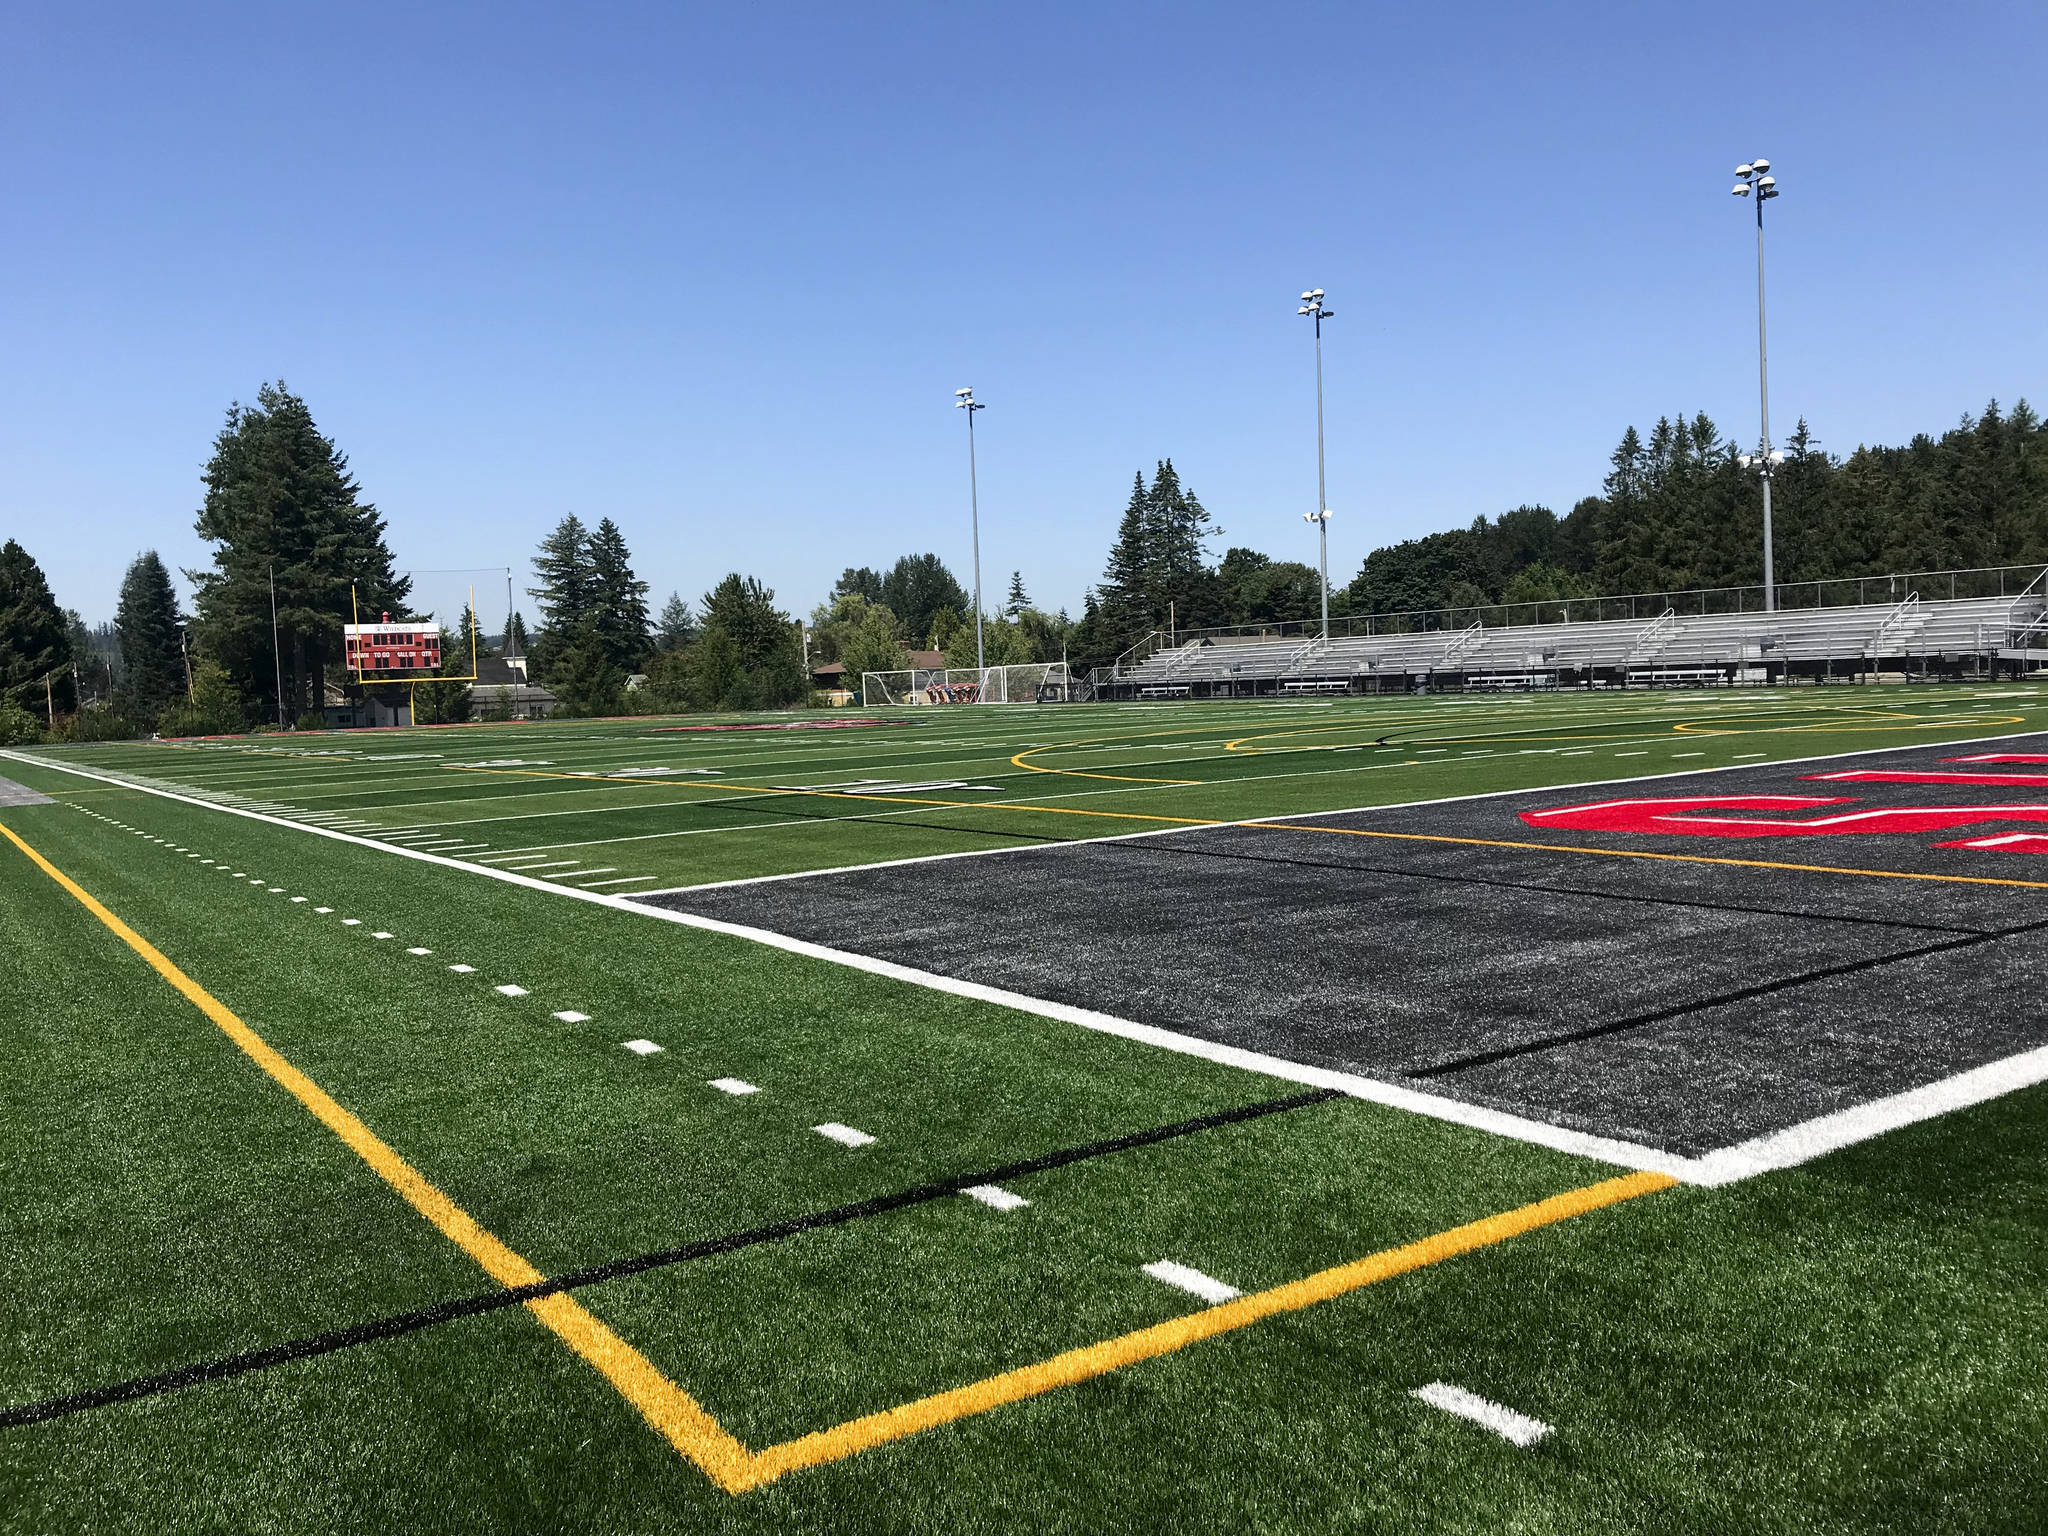 Shaun Scott, staff photo                                The Mount Si High School stadium field received a makeover this summer. New synthetic artifical turf was installed in mid-July. It was the first time the playing surface at Mount Si High School had been replaced since 2005.